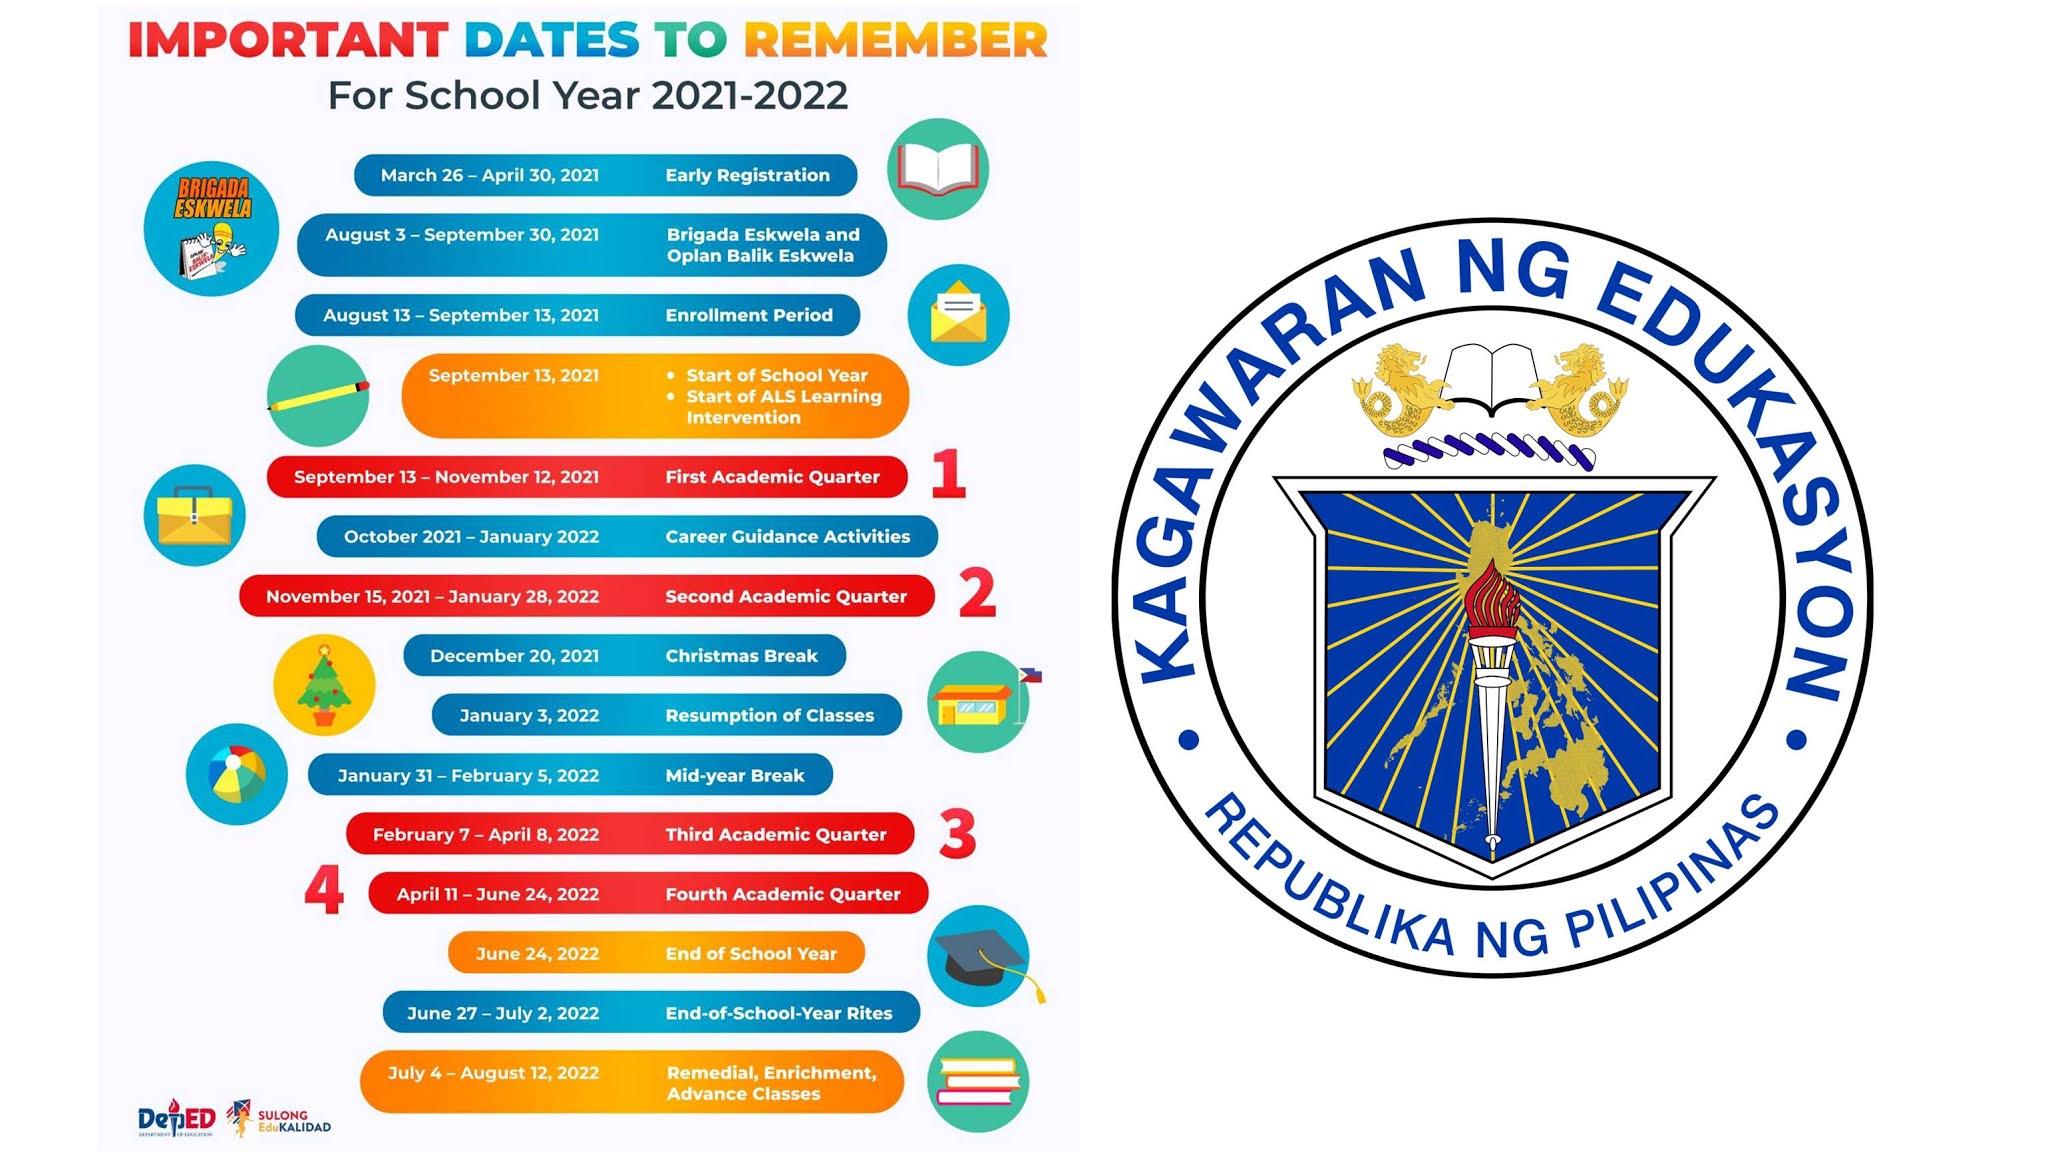 deped-issues-school-calendar-activities-for-sy-2021-2022-issuesph